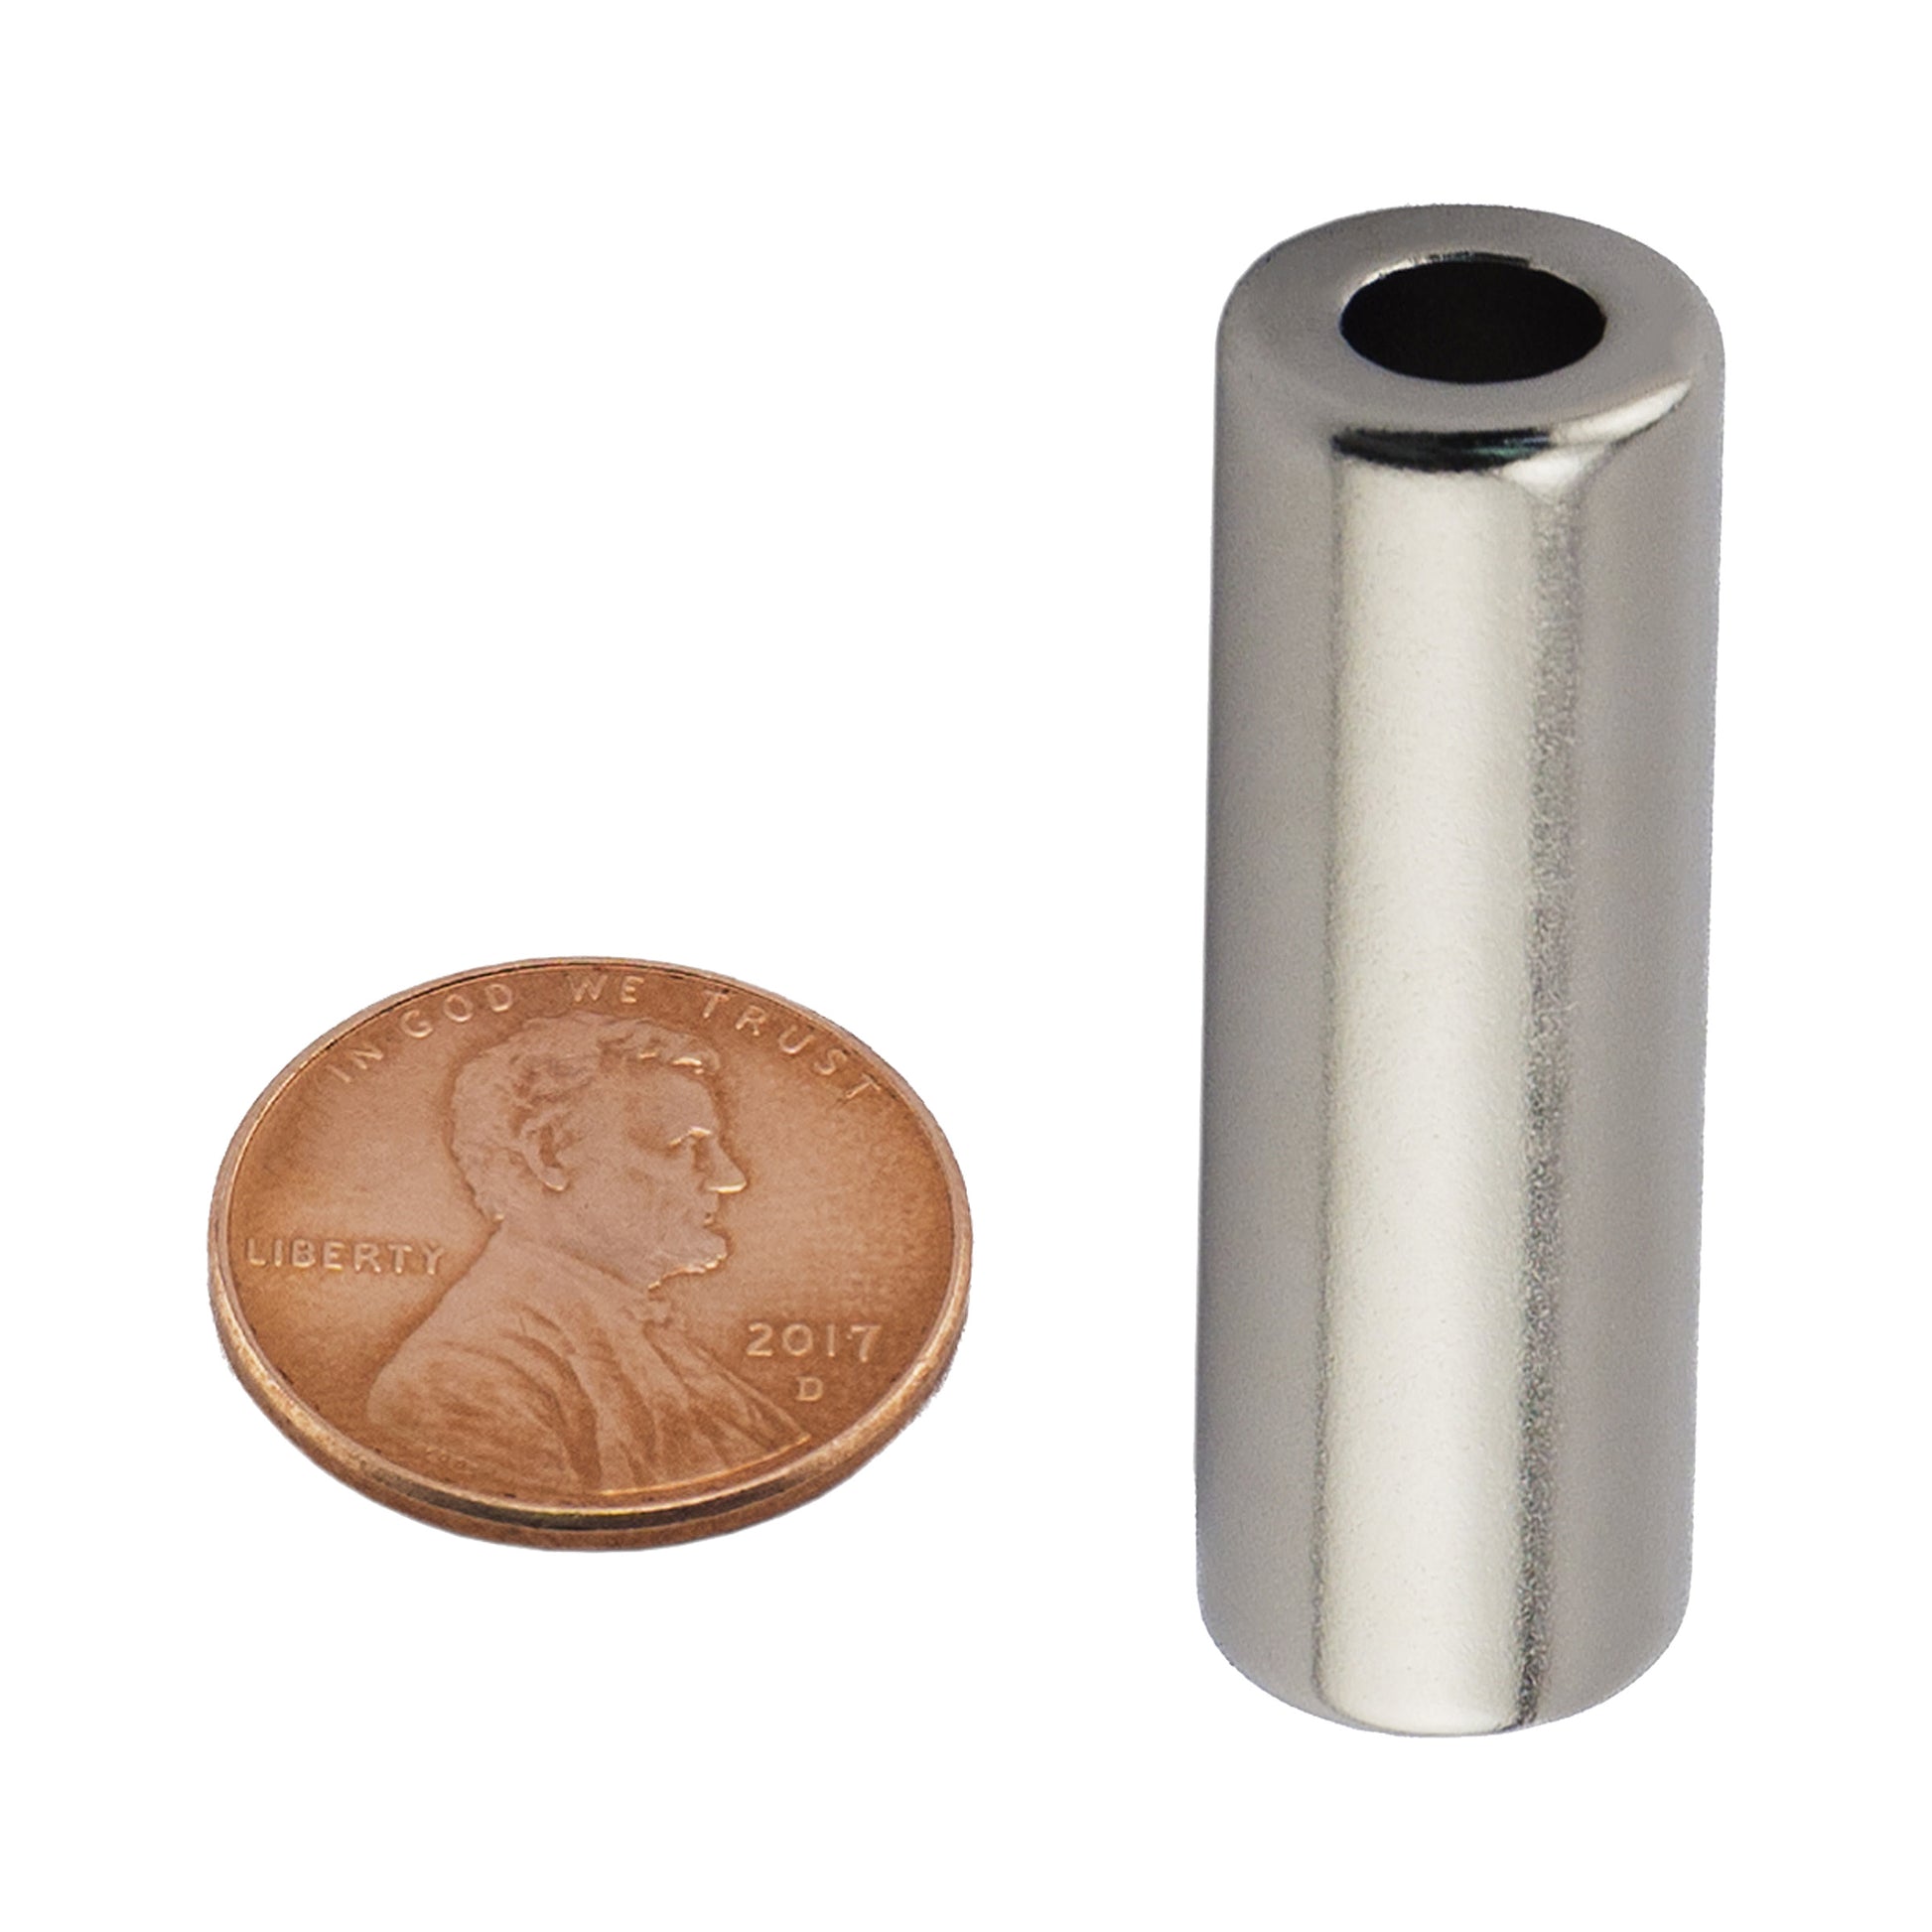 Load image into Gallery viewer, NR005025N Neodymium Ring Magnet - Compared to Penny for Size Reference